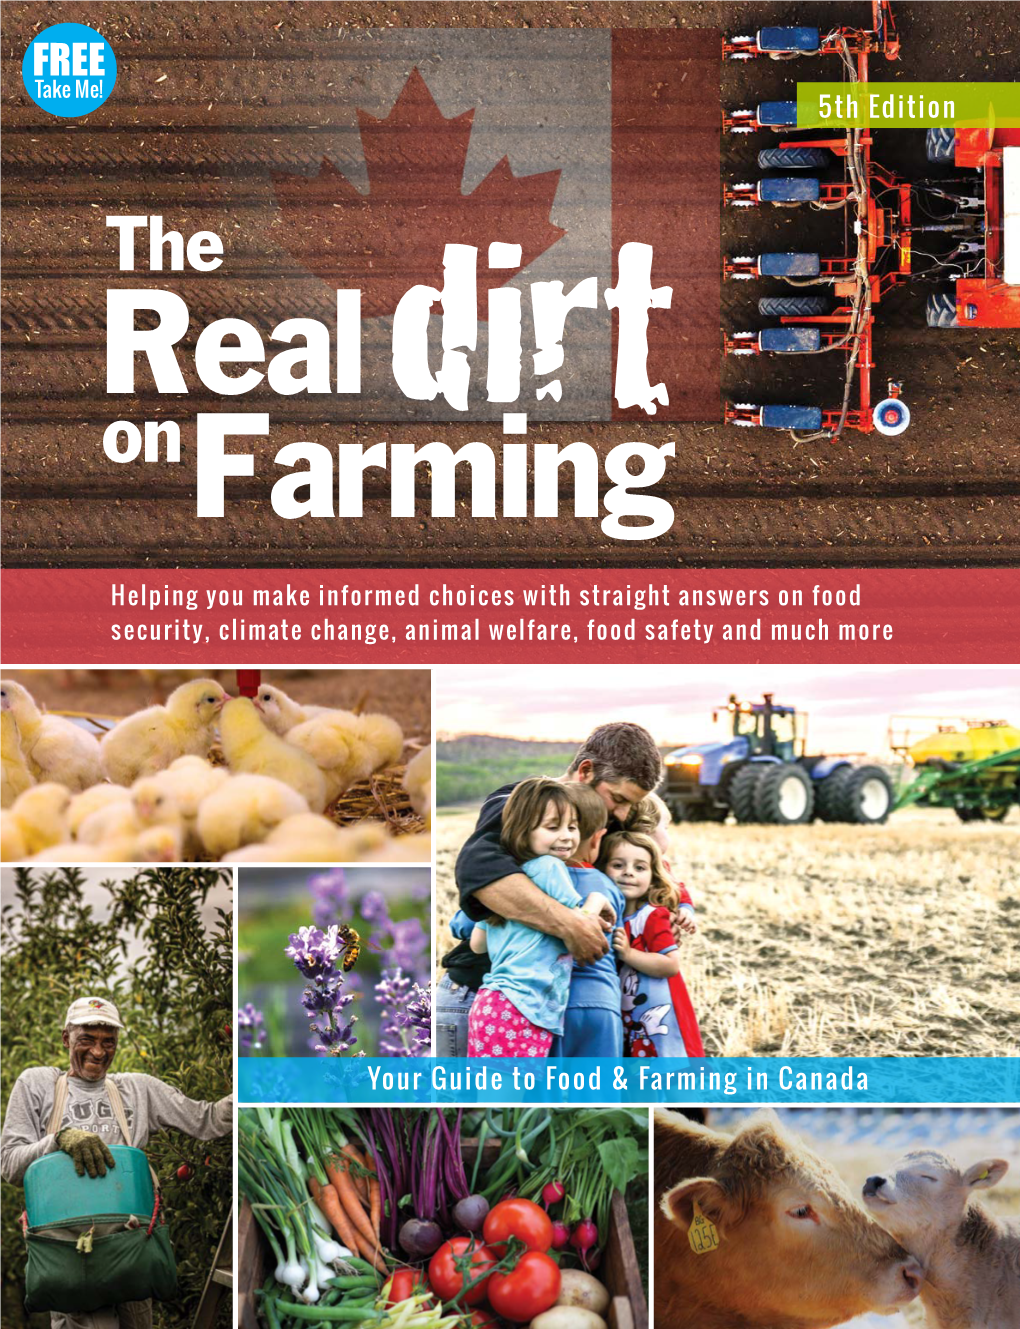 5Th Edition Your Guide to Food & Farming in Canada